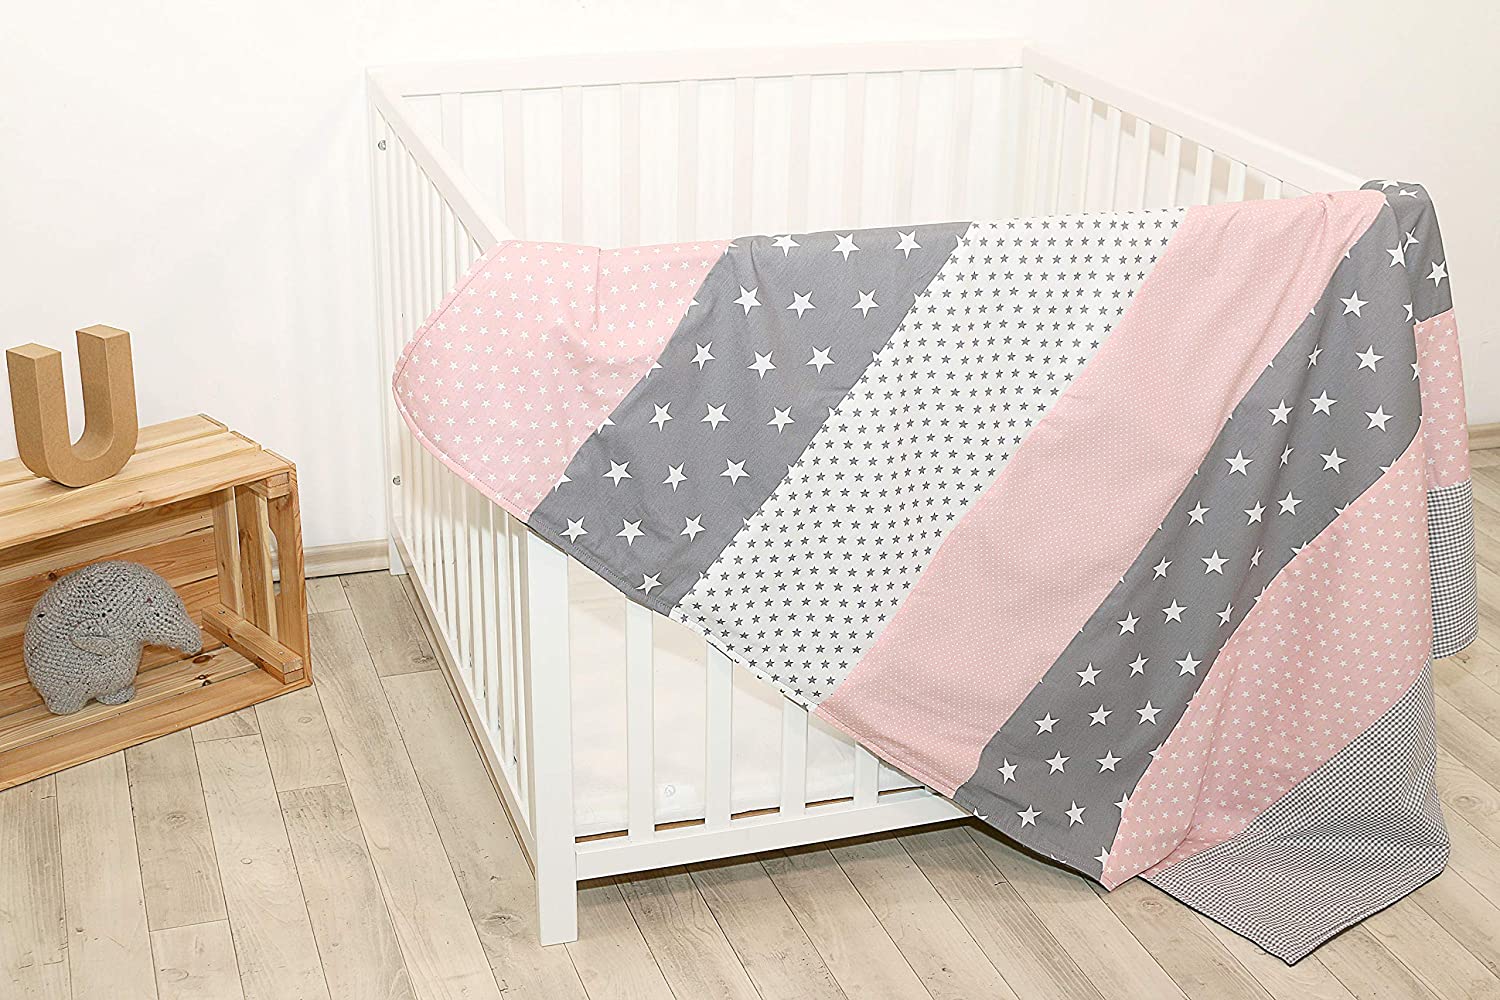 ULLENBOOM® Baby Blanket made of ÖkoTex Cotton and Fleece, Ideal as a Pram Blanket or Play Blanket, 70 x 100 cm & 100 x 140 cm and Made in the EU, Design: Stars, Dots, Patchwork 70 x 100 cm Mint grey